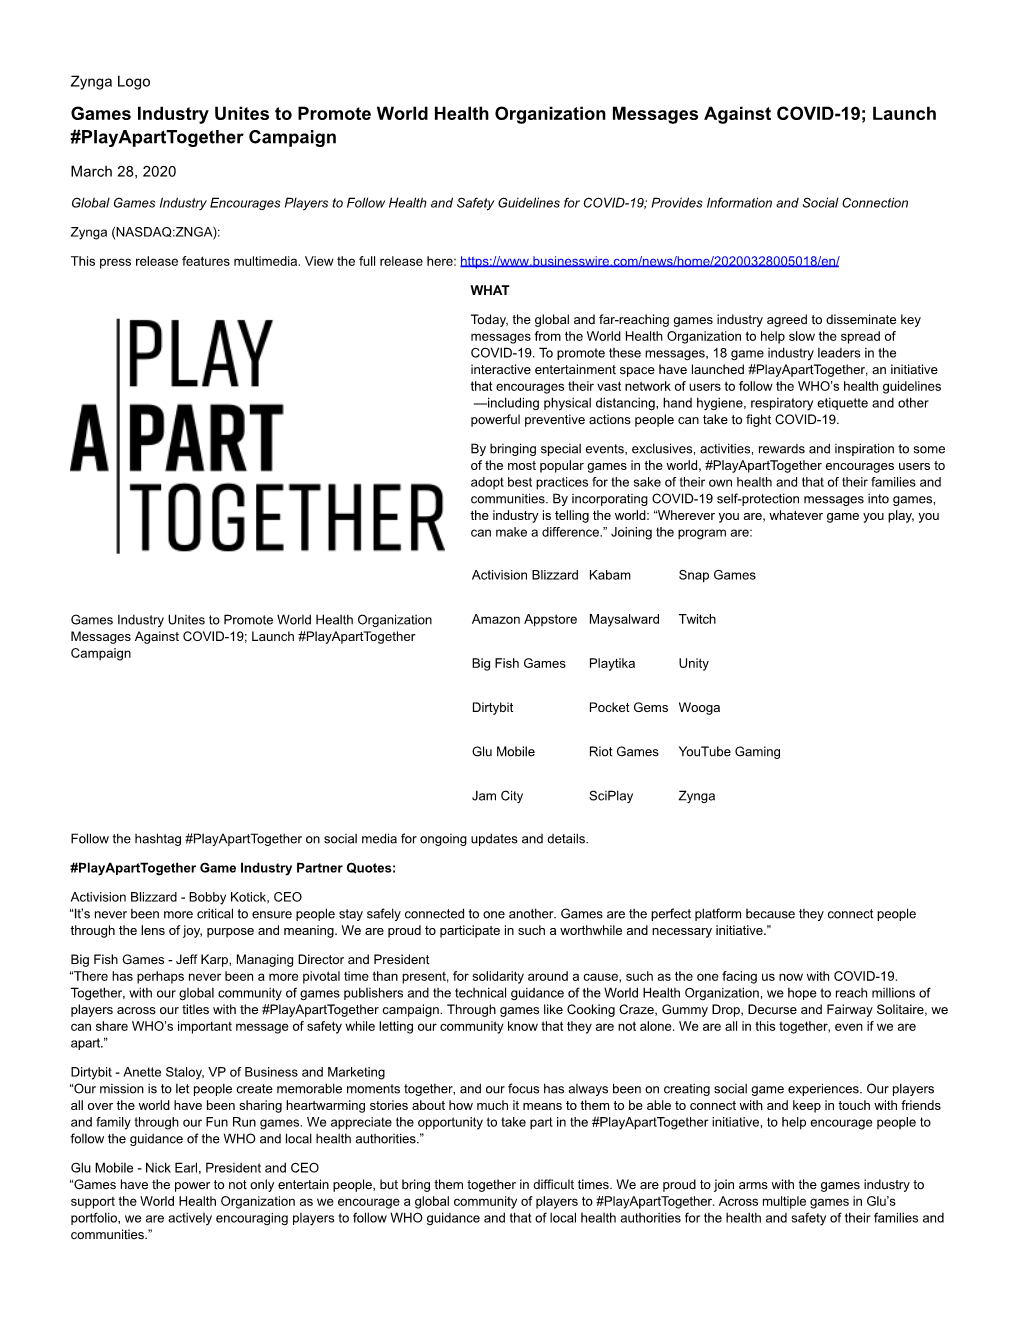 Games Industry Unites to Promote World Health Organization Messages Against COVID-19; Launch #Playaparttogether Campaign